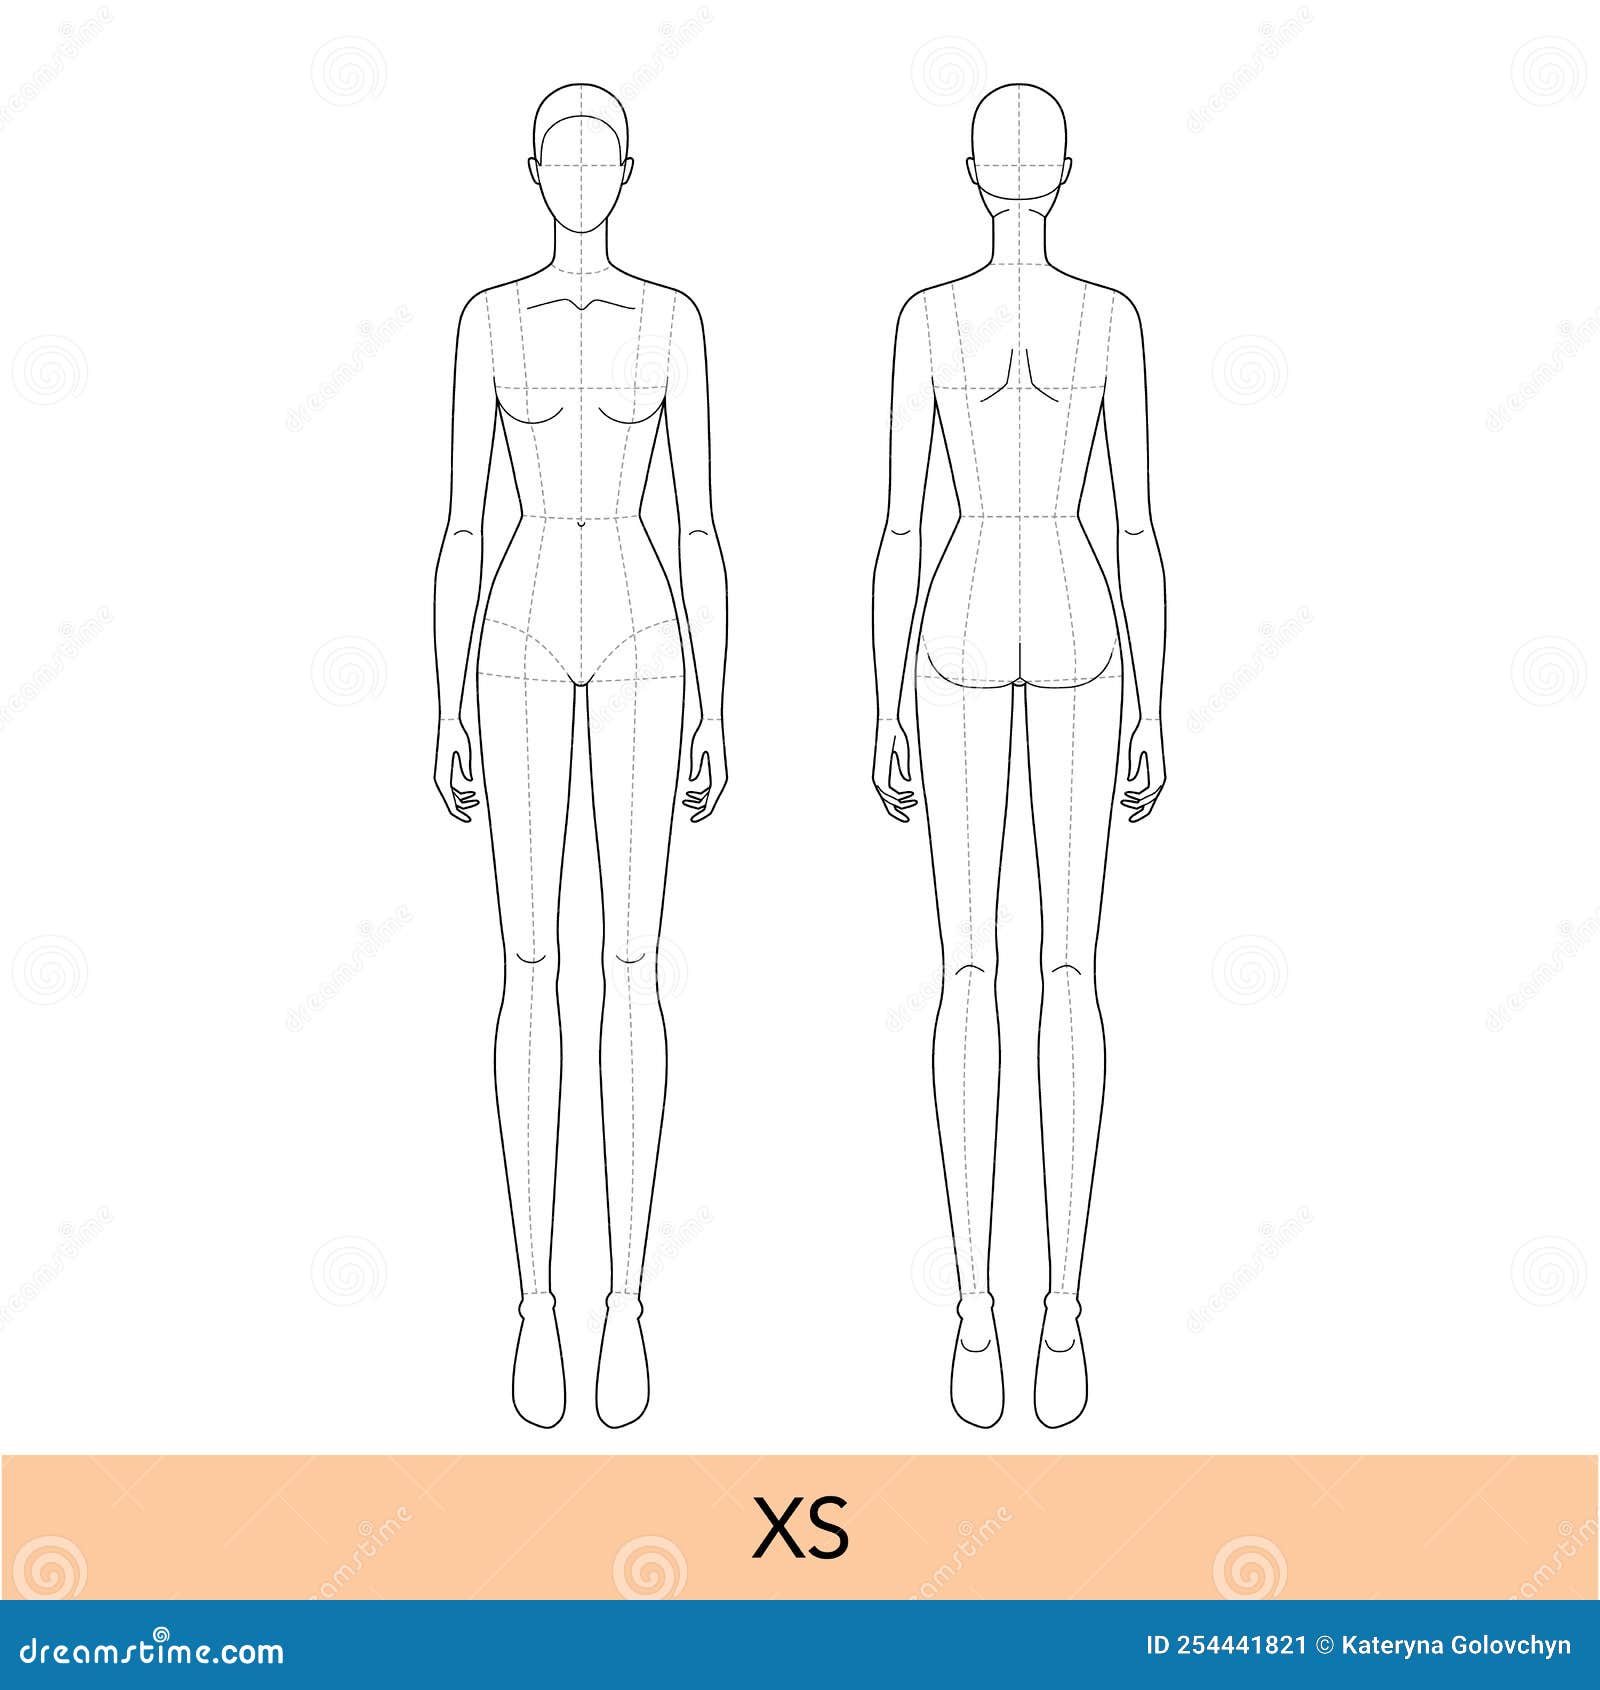 xs size women fashion template 9 nine head croquis lady model skinny body with main lines figure front, back view